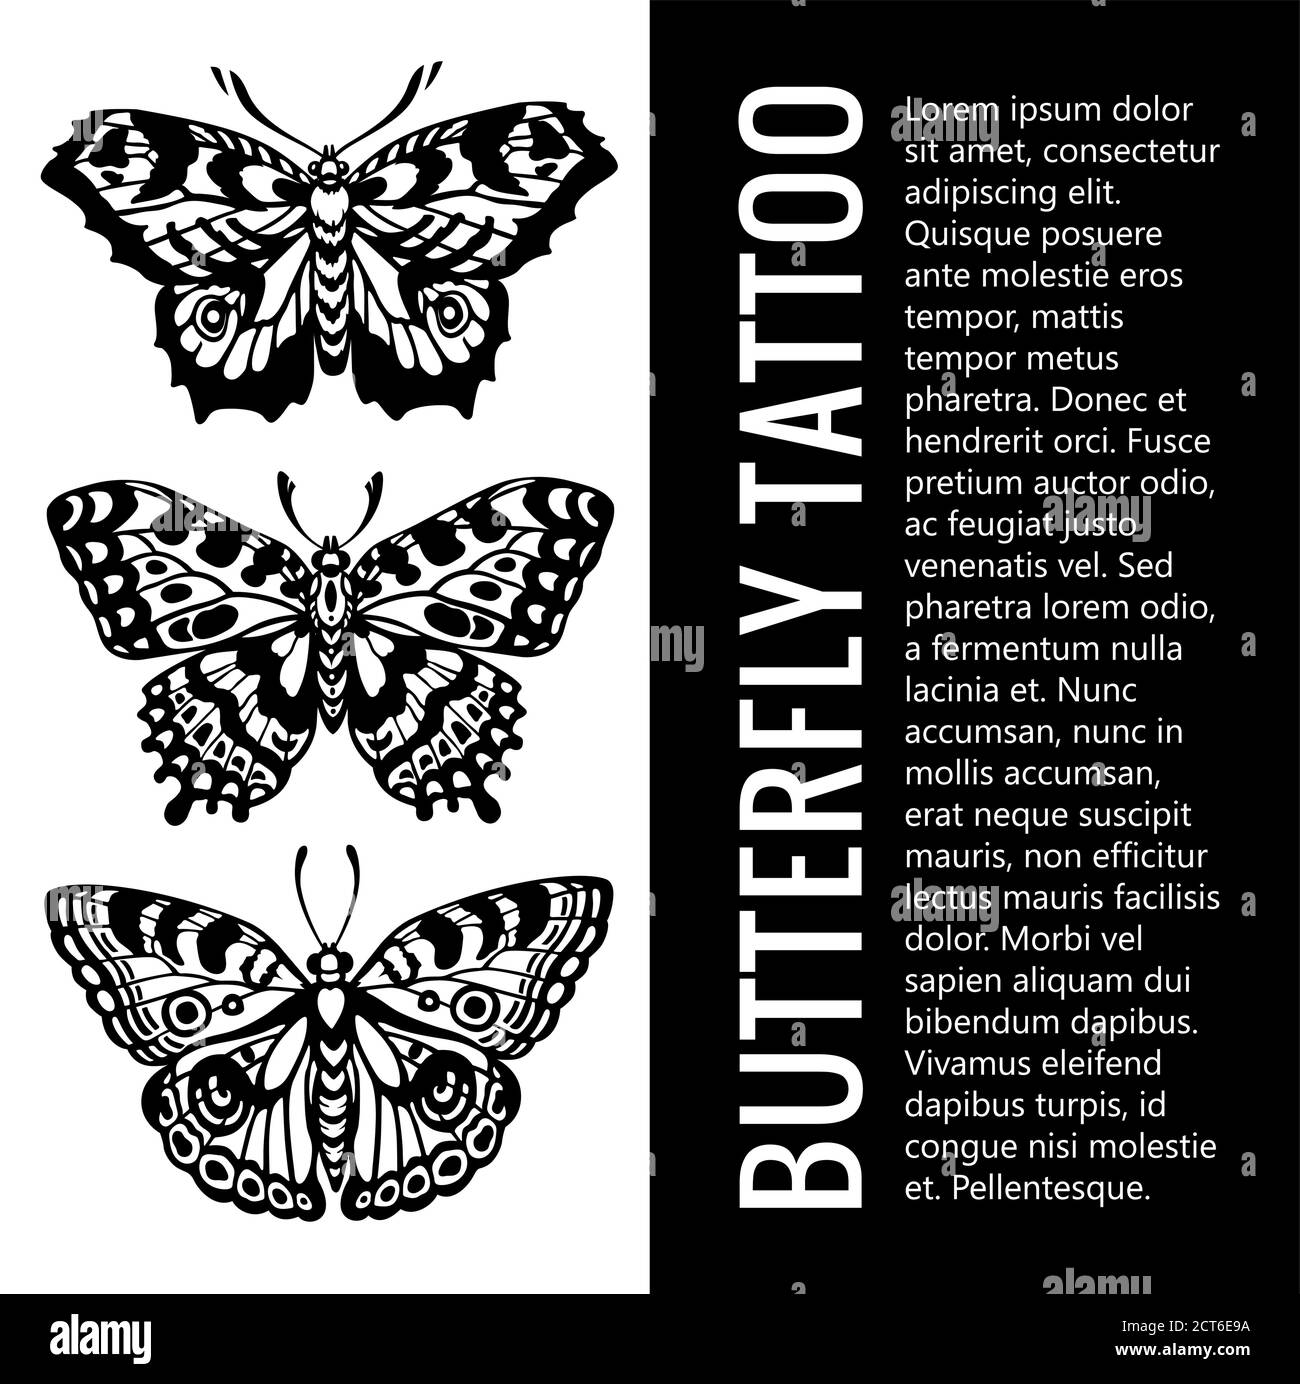 Floral Pattern And Tribal Beautiful Butterfly Tattoo For Women